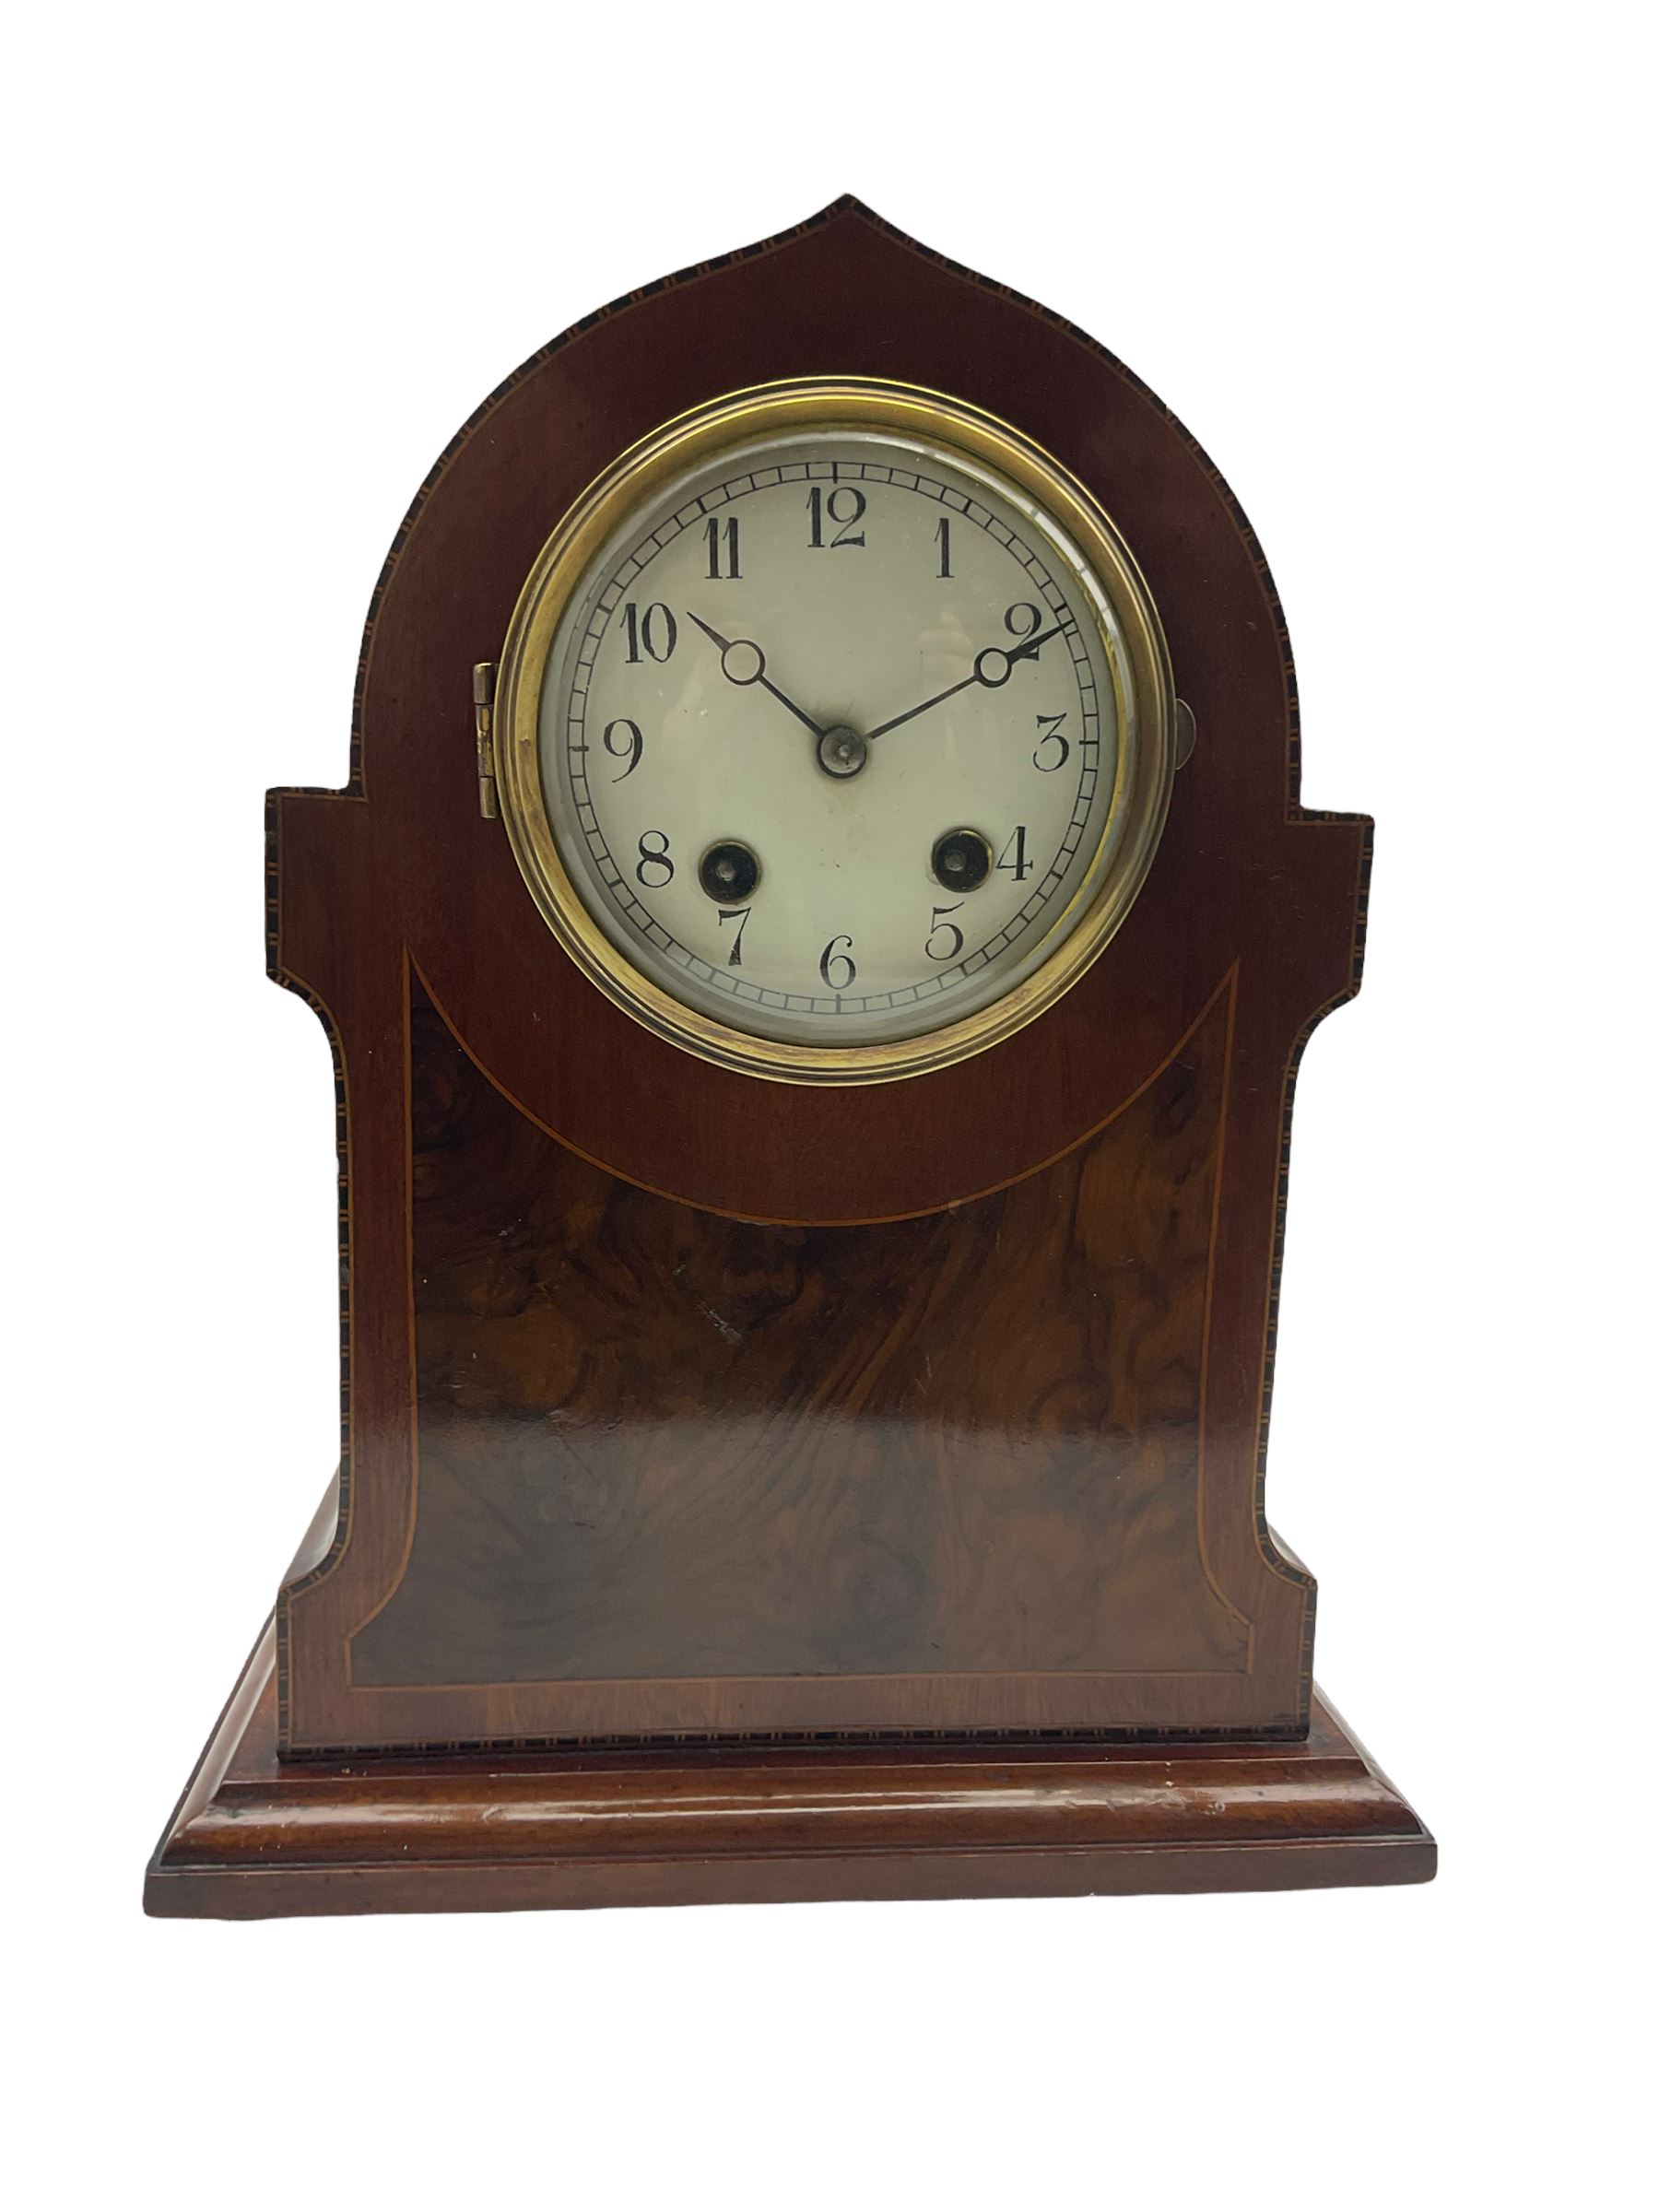 An Edwardian c1910 mahogany veneered mantle clock in a pointed arch case with inlaid satinwood strin